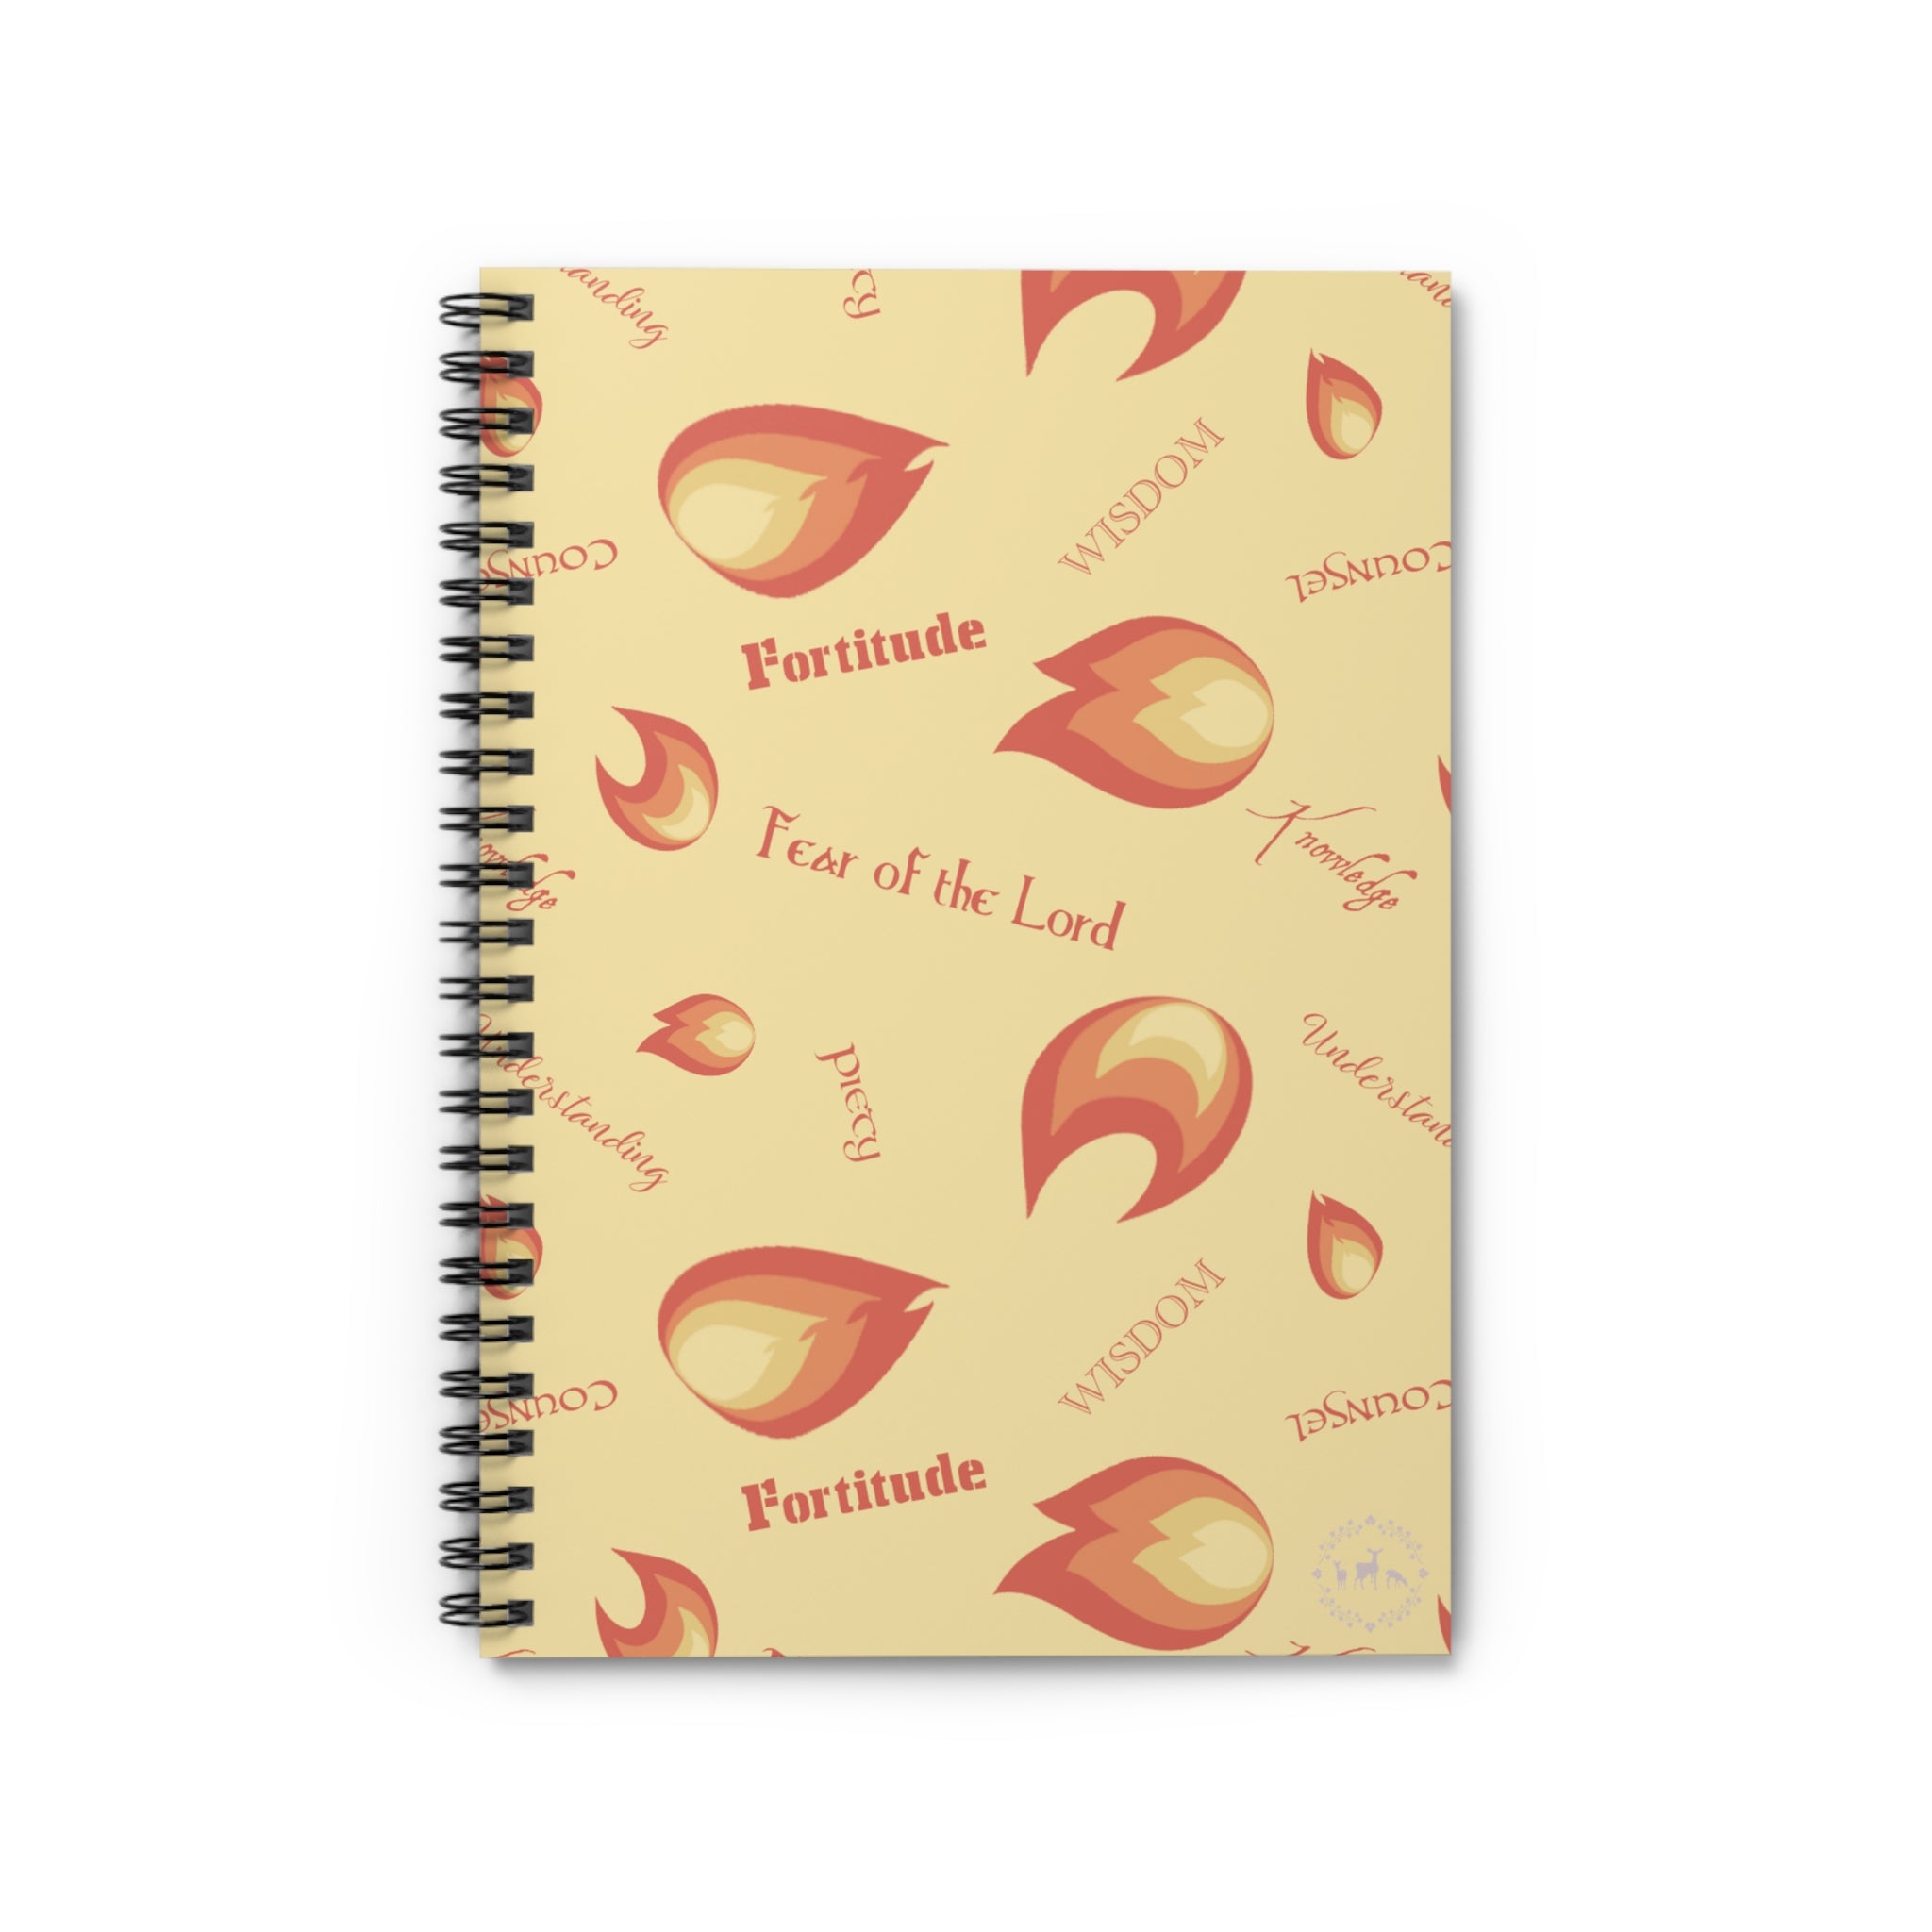 Gifts of the Holy Spirit Spiral Notebook - Ruled Line